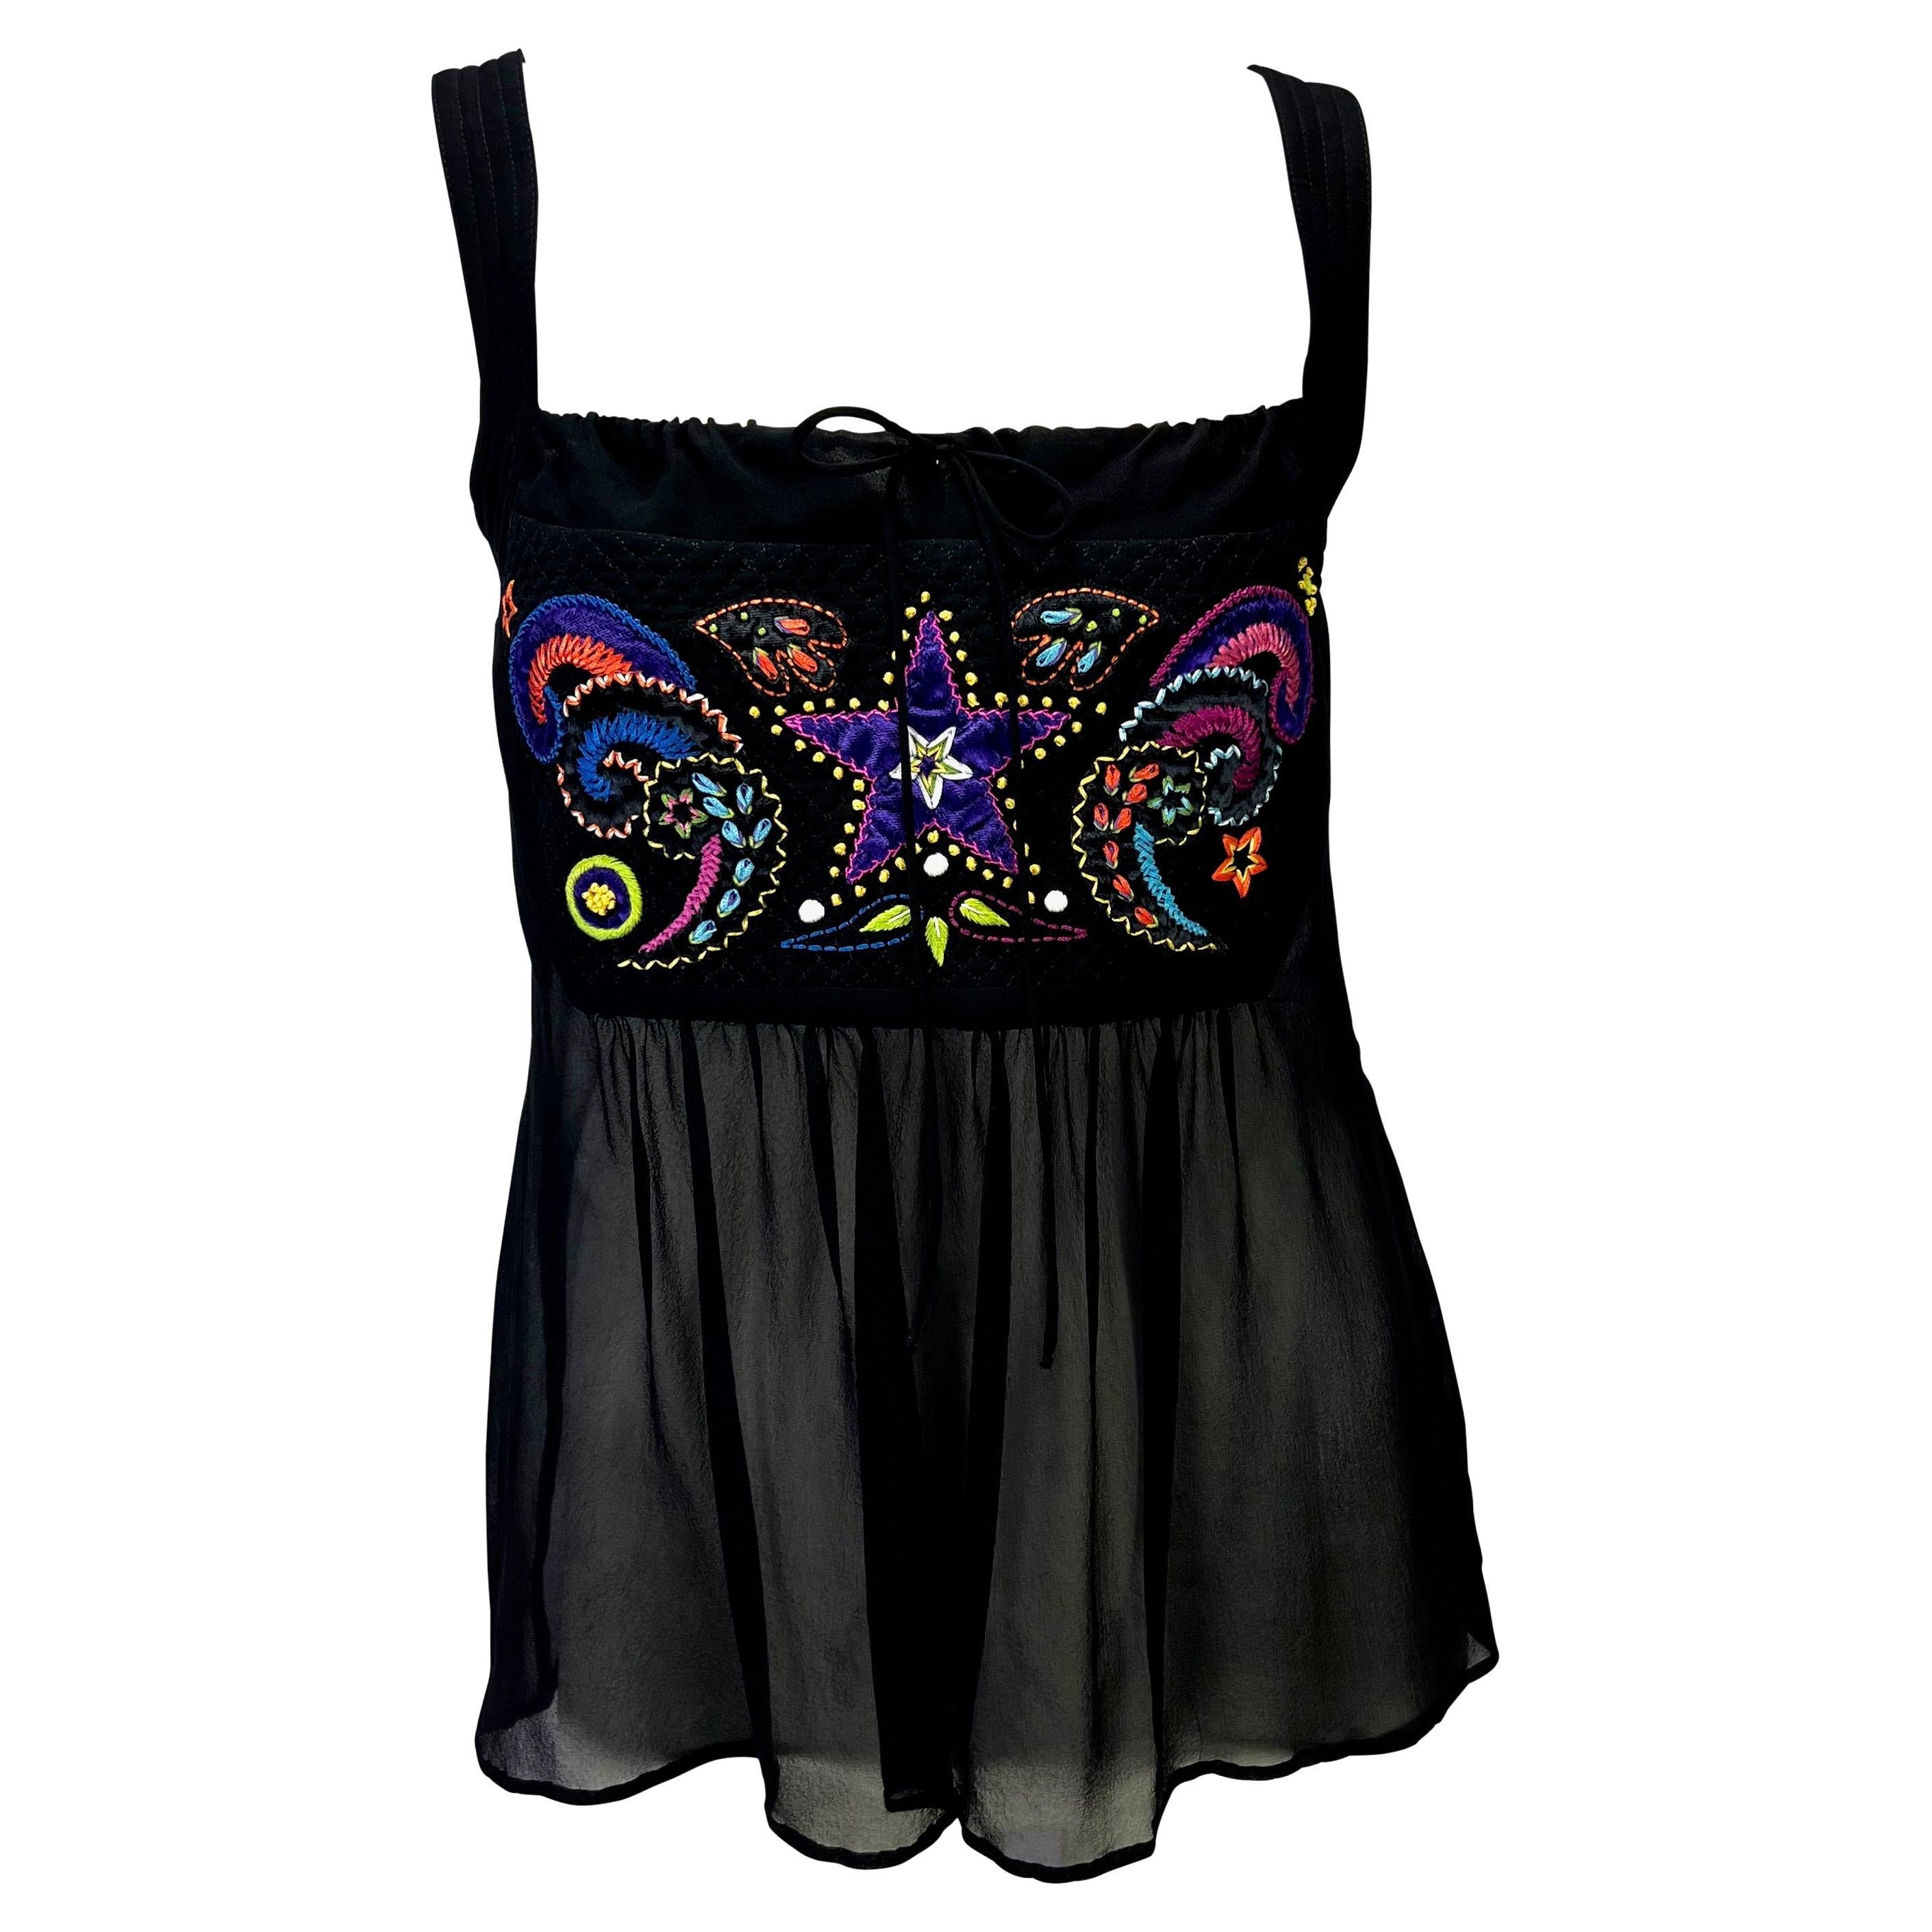 F/W 2002 Gianni Versace by Donatella Black Sheer Embroidered Babydoll Tank Top en vente